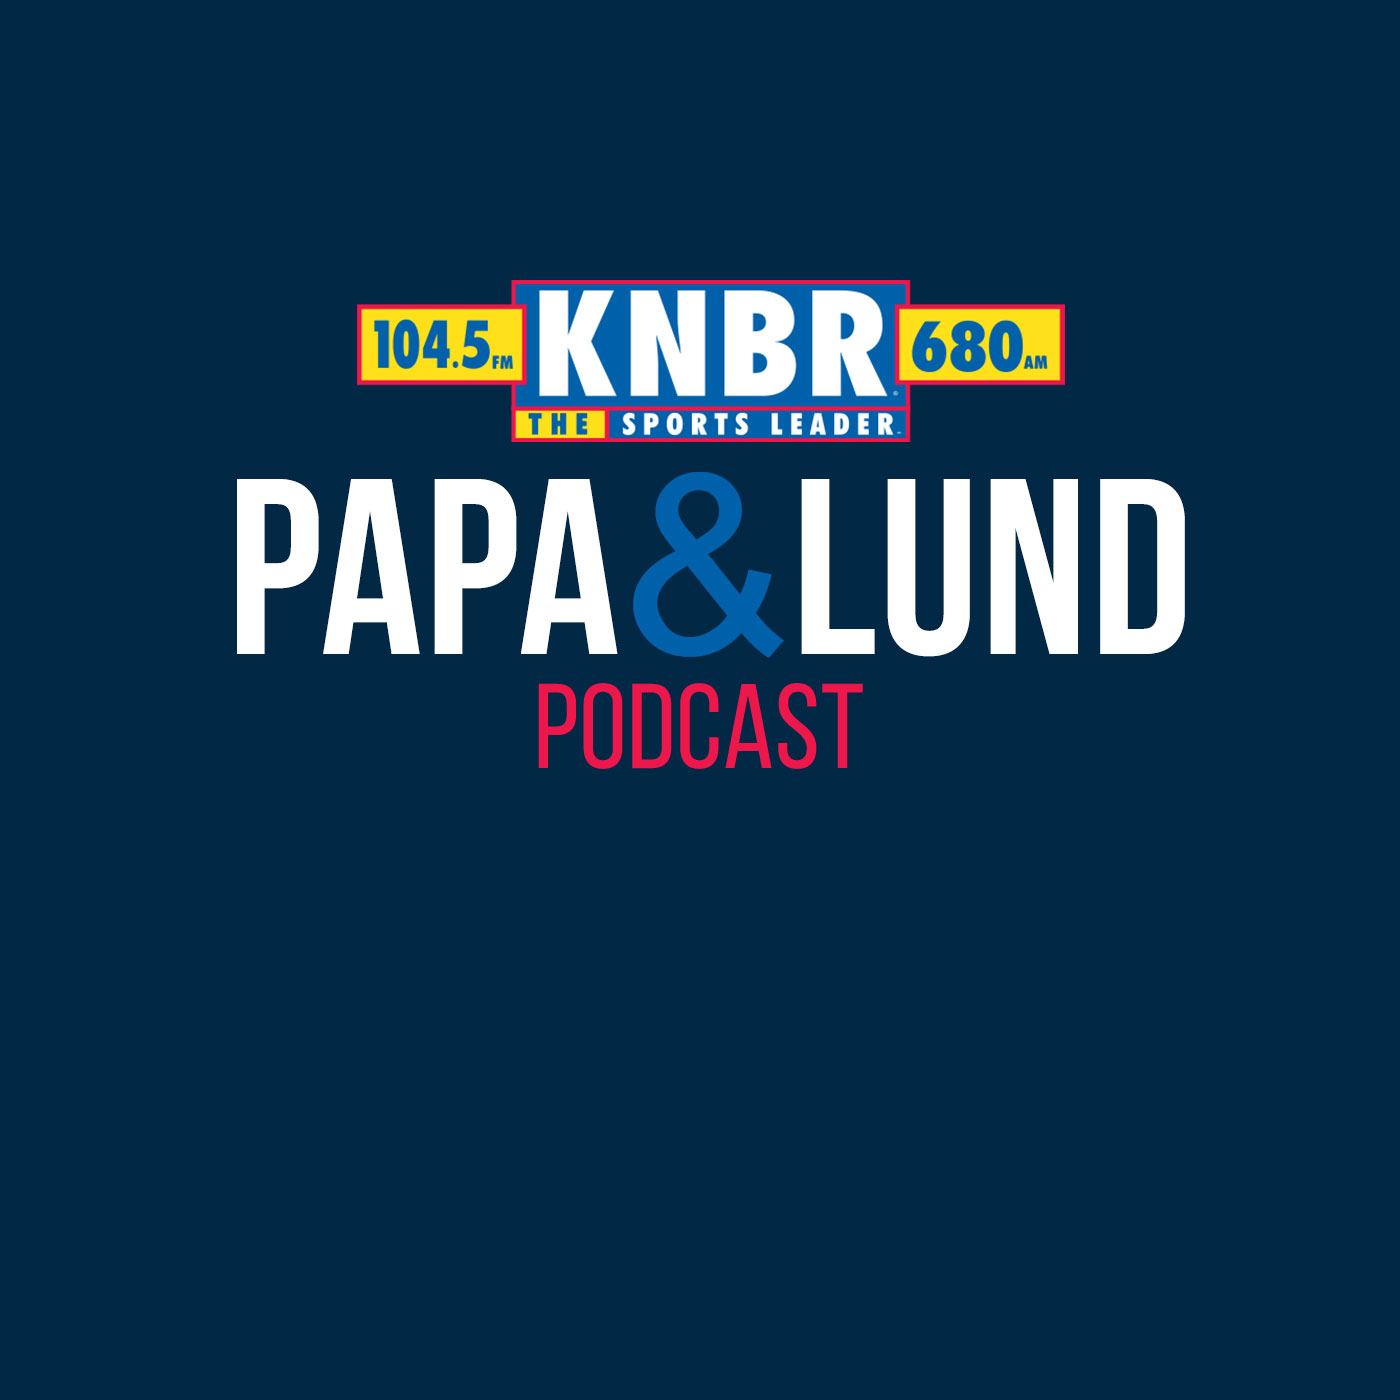 4-9 Mike Trudell joins Papa & Lund to break down the final regular season matchup between the Lakers & Warriors and how the two teams match up, especially with a potential Play-In game on the horizon